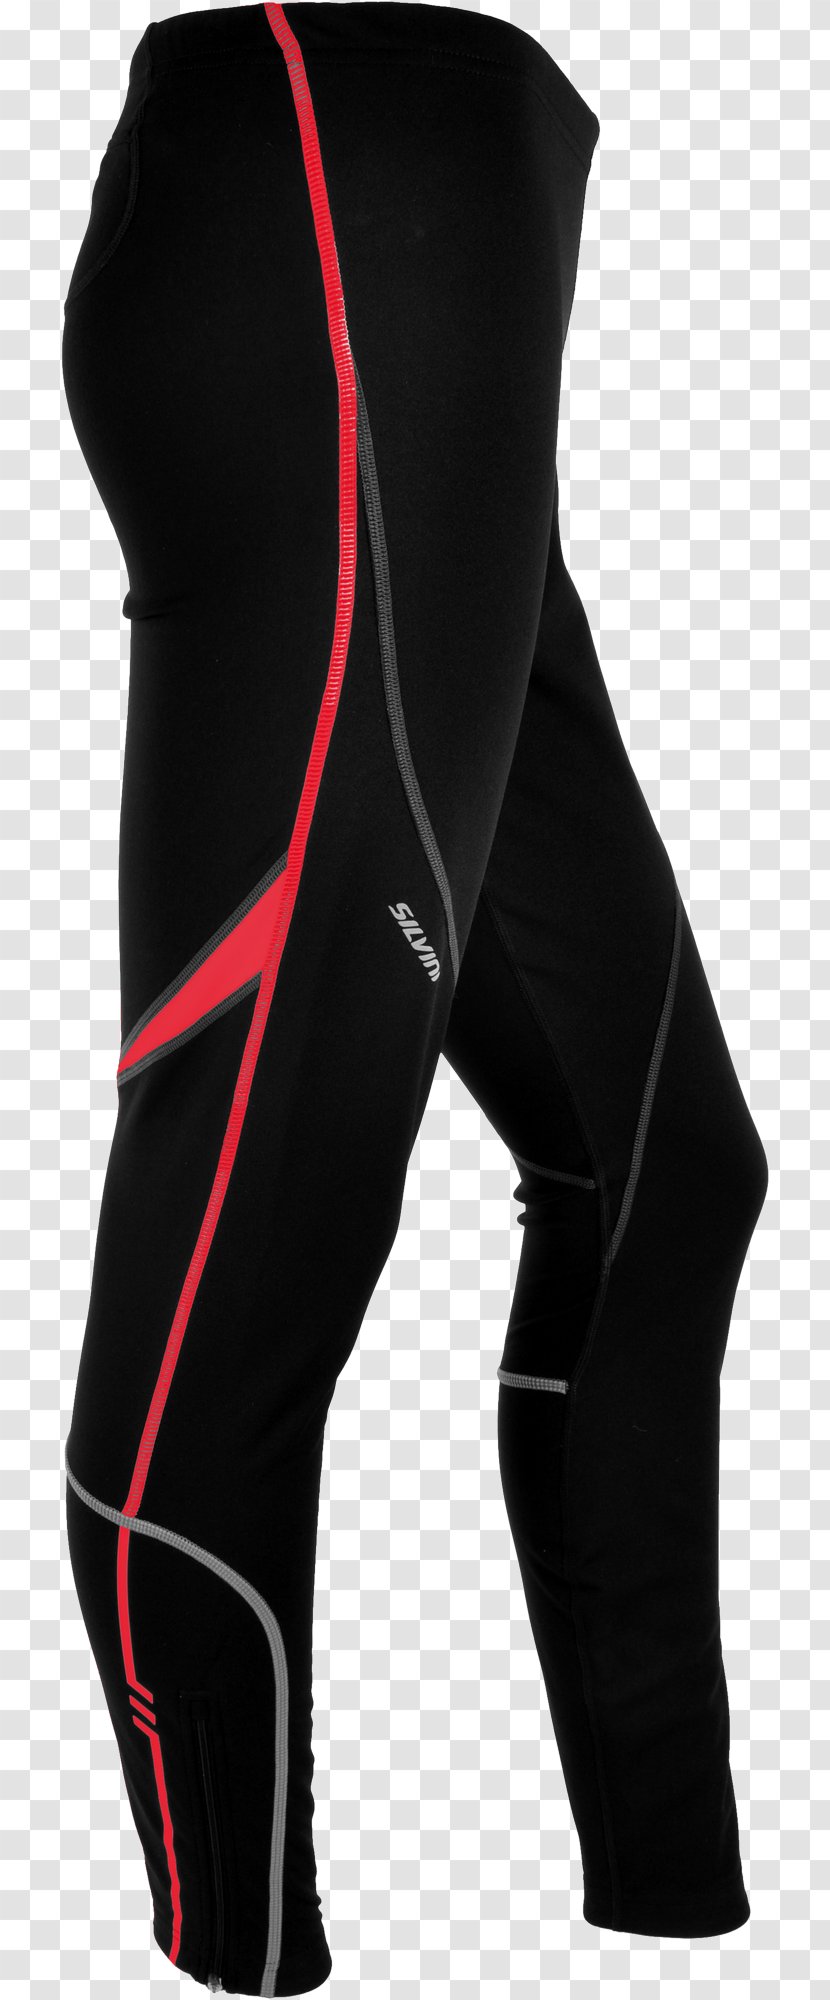 Wetsuit - Tights - Glare Efficiency Transparent PNG